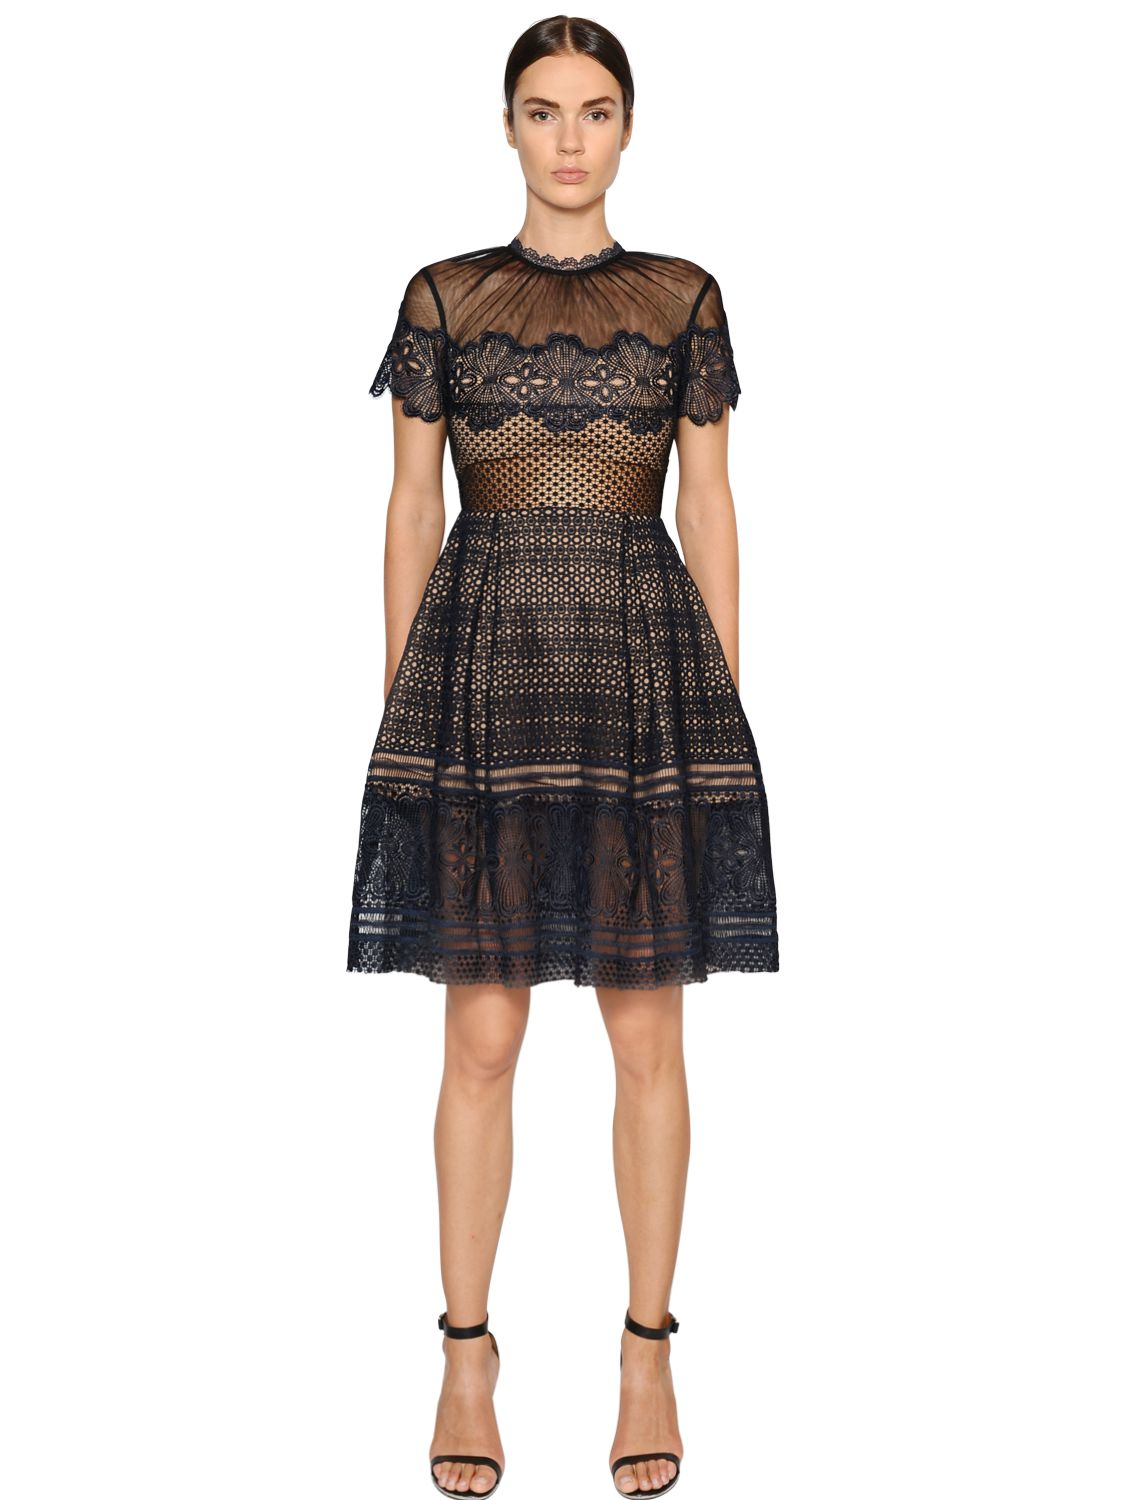 Lyst - Self-Portrait Felicia Embroidered Sheer Lace Dress in Black